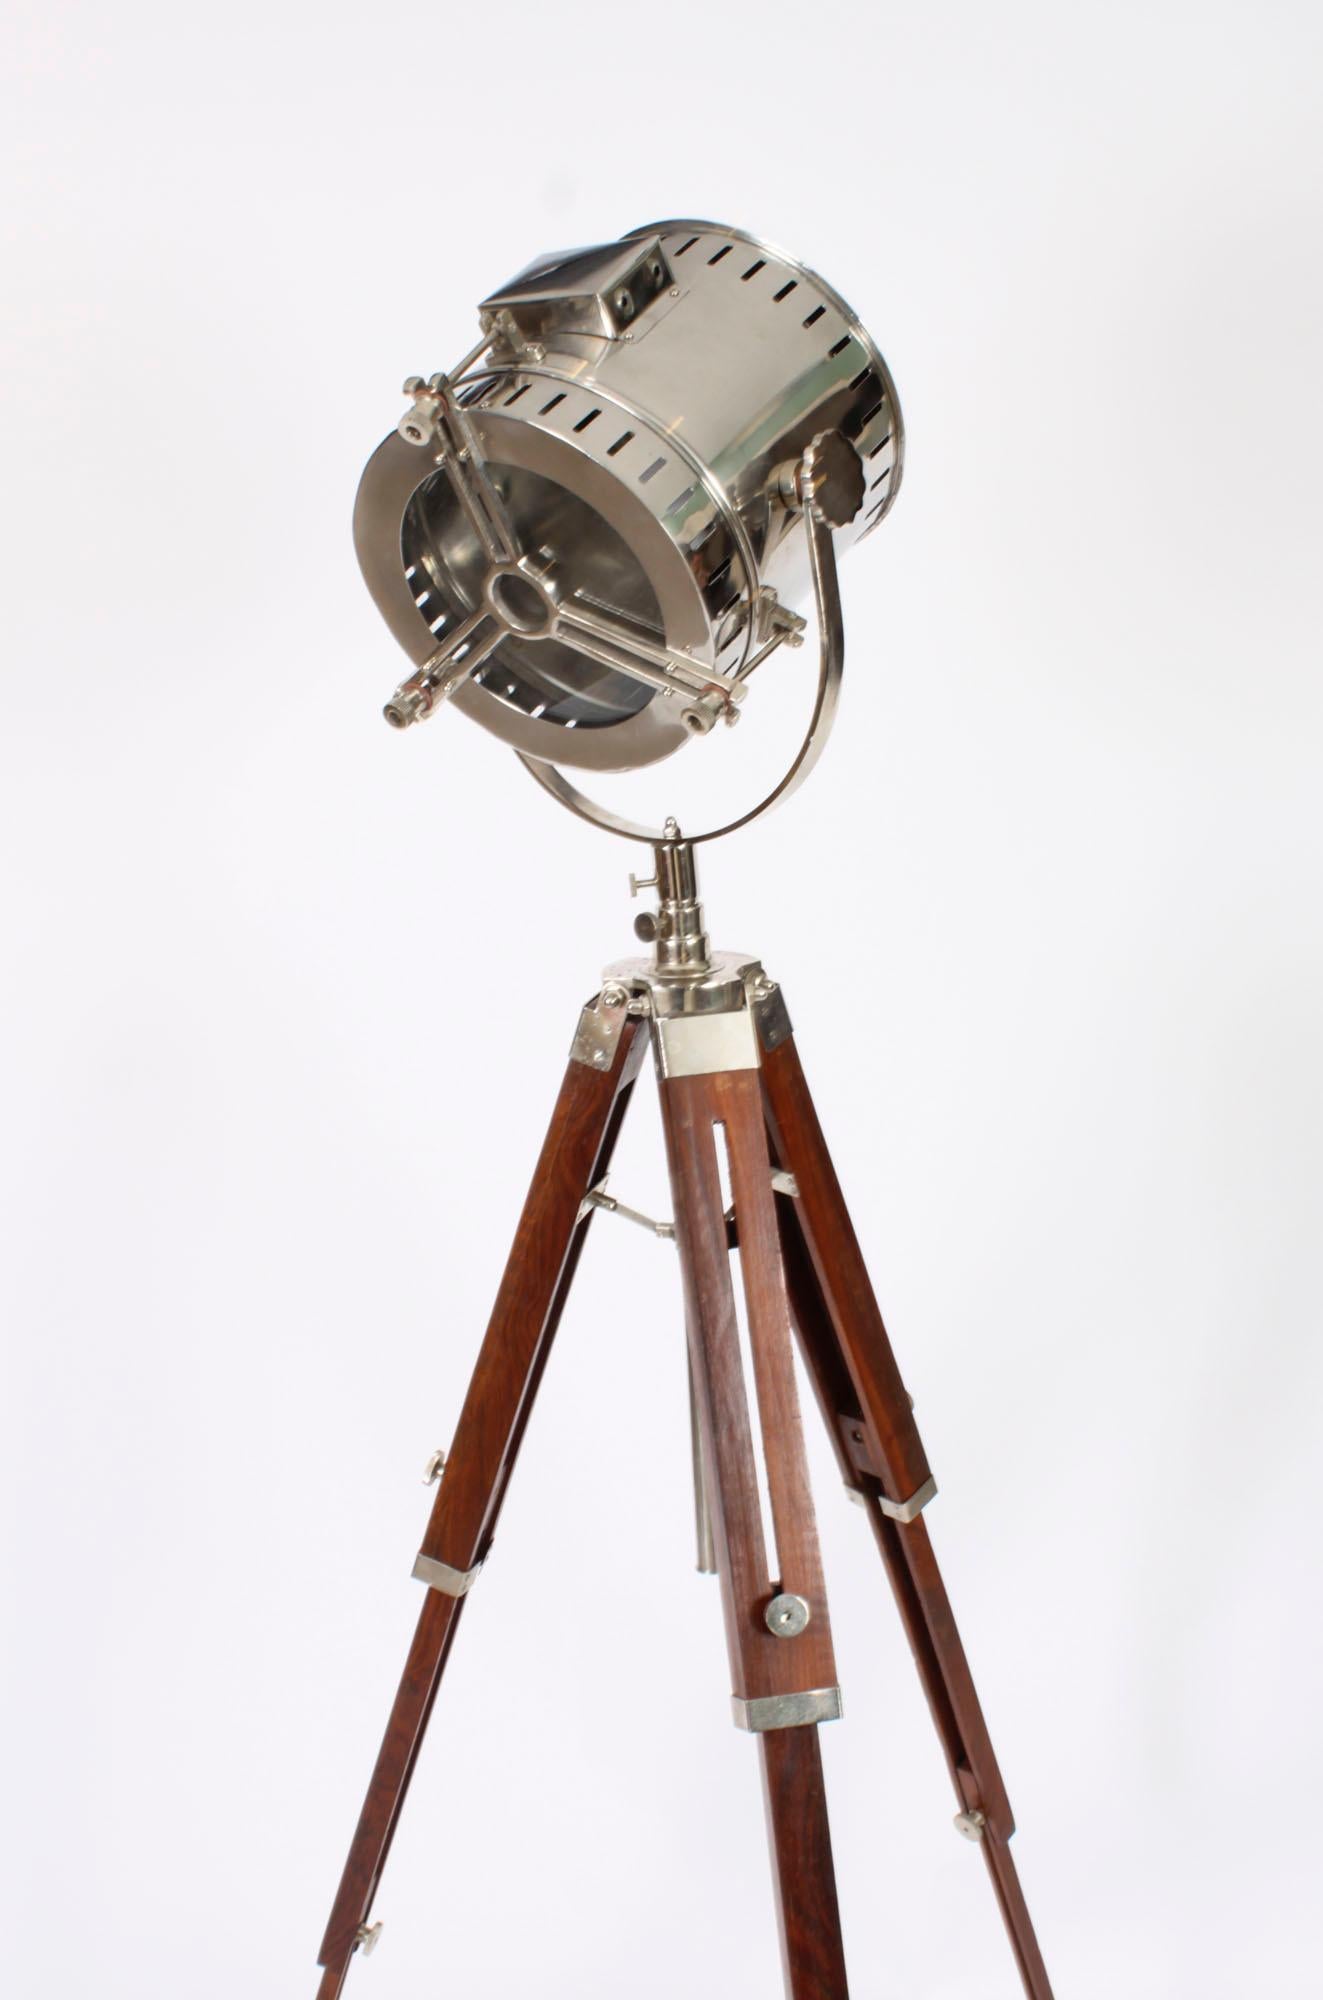 This is a highly attractive interwar revival industrial design tripod searchlight floor lamp, late 20th Century in date.

This splendid nautical-inspired floor standing lamp is crafted with a swiveling polished nickel searchlight mounted on an